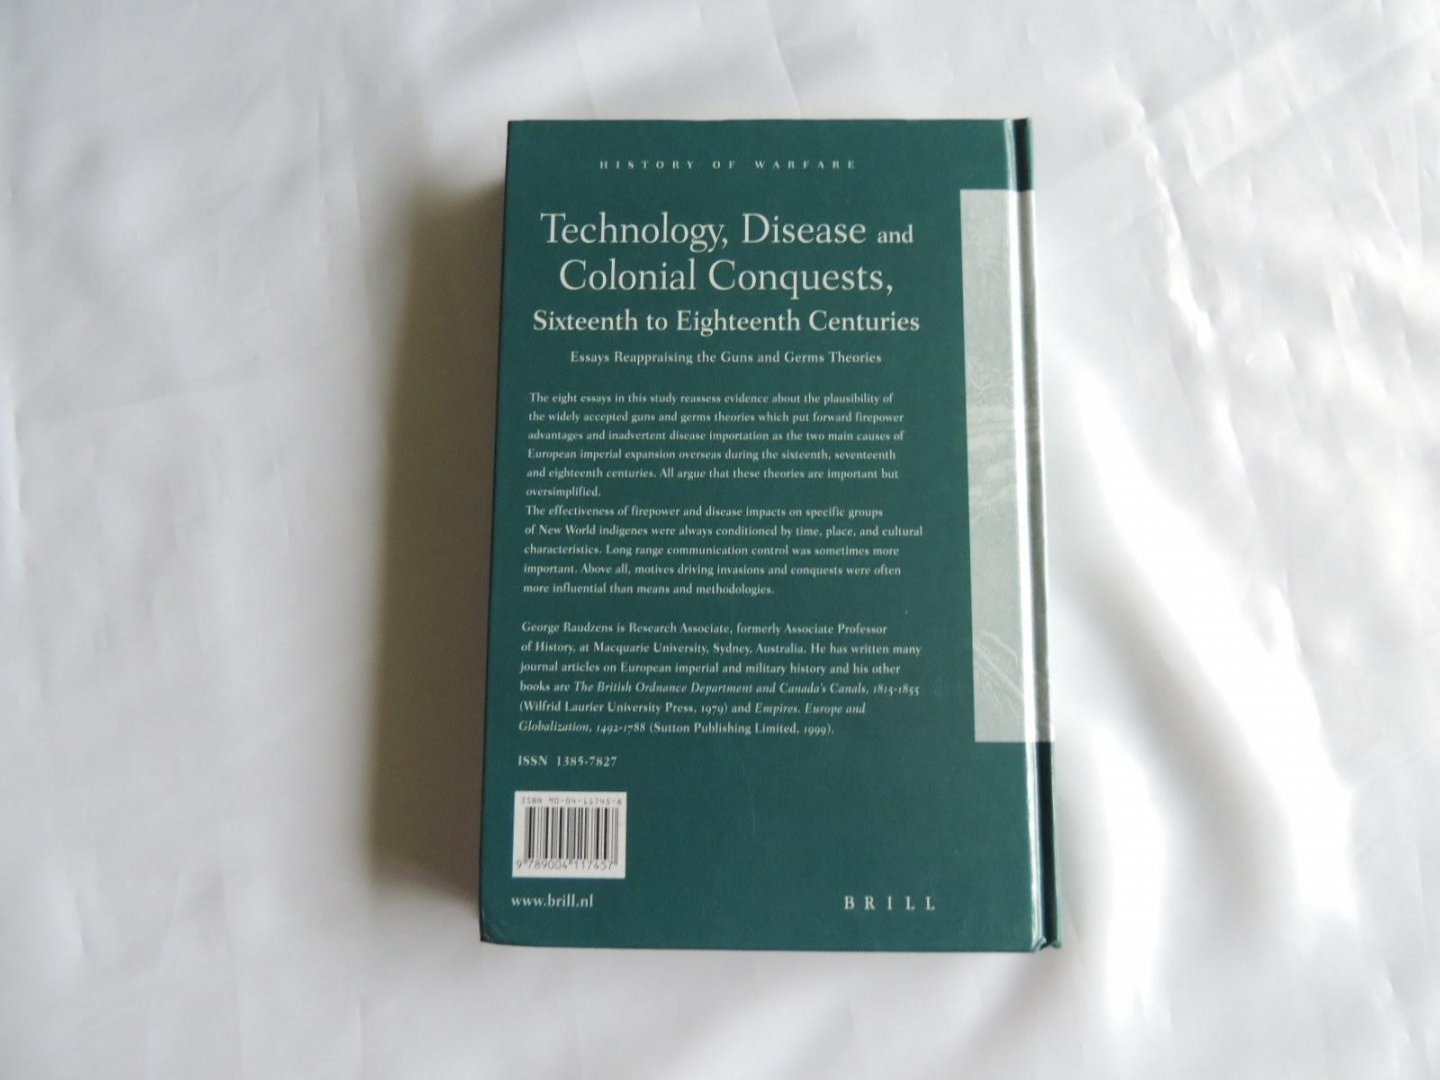 George Raudzens, Kelly deVries - History of Warfare. Volume 2. Technology, disease, and colonial conquests, sixteenth to eighteenth centuries : essays reappraising the guns and germs theories